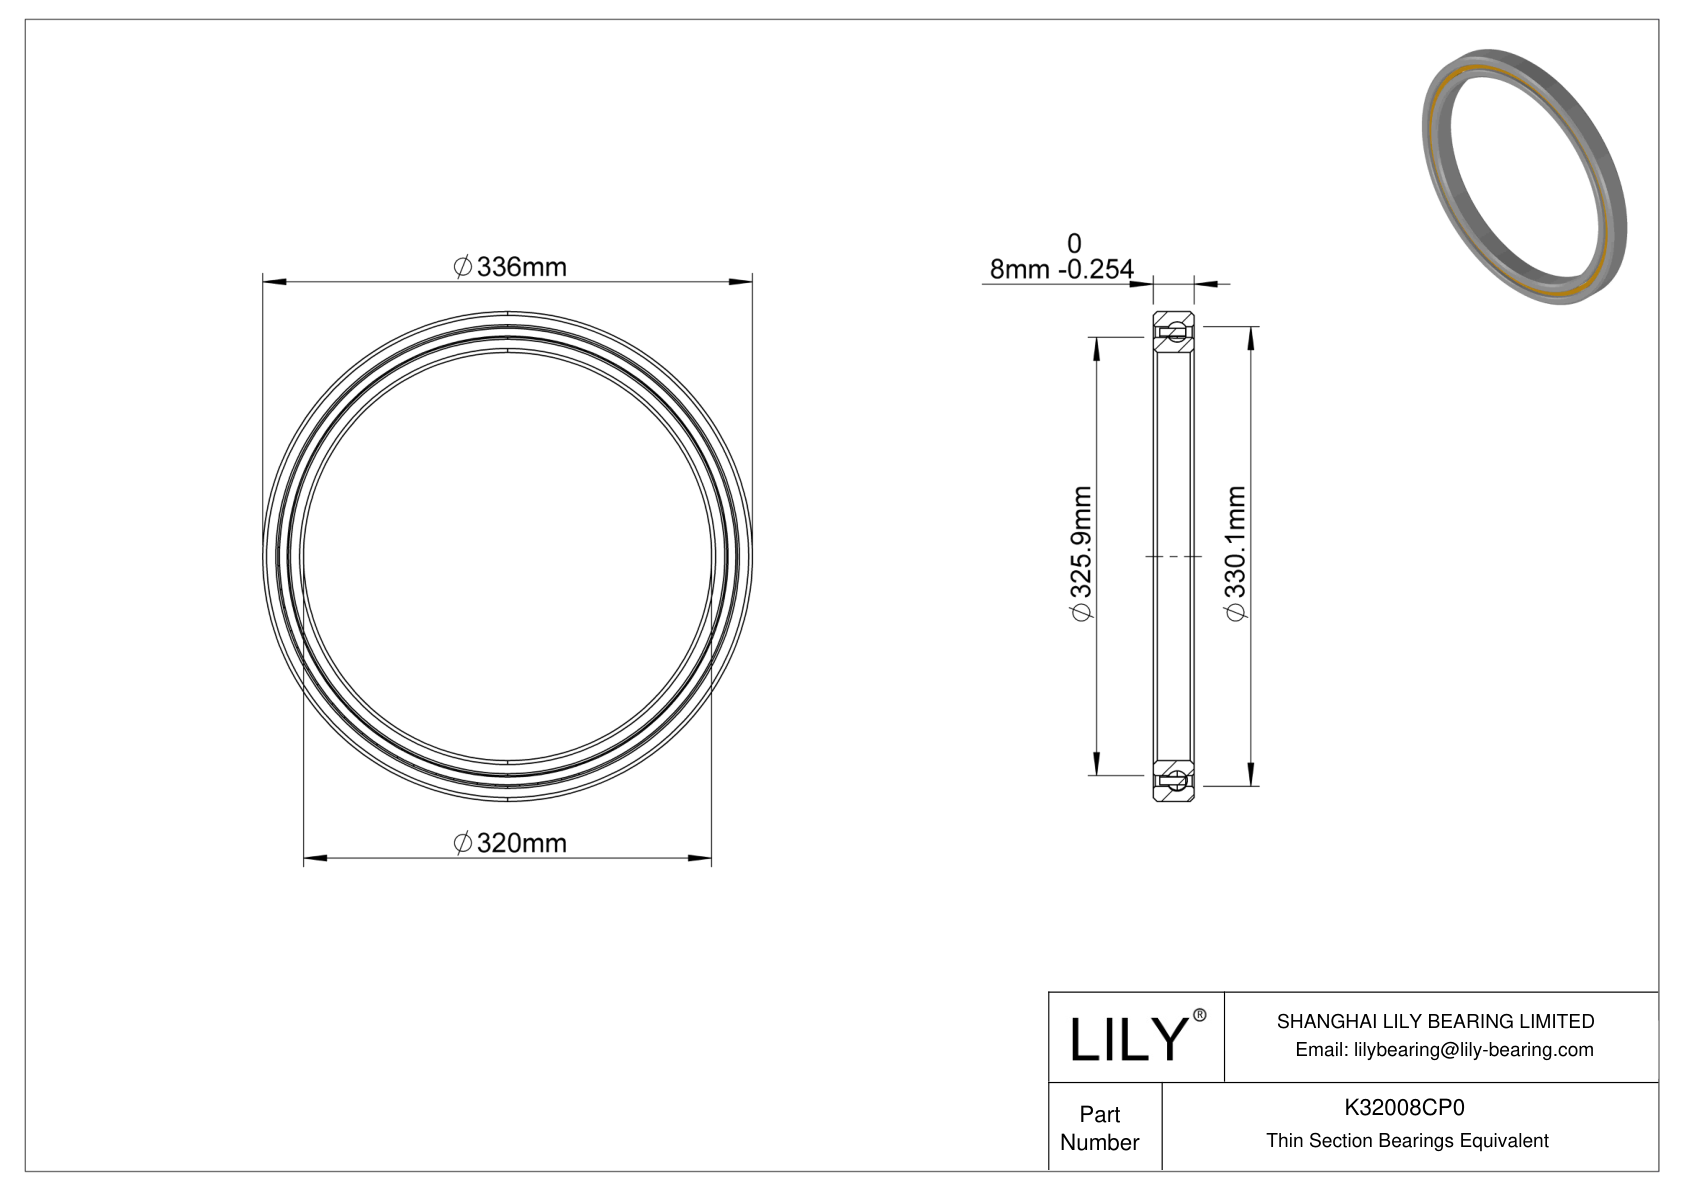 K32008CP0 Constant Section (CS) Bearings cad drawing